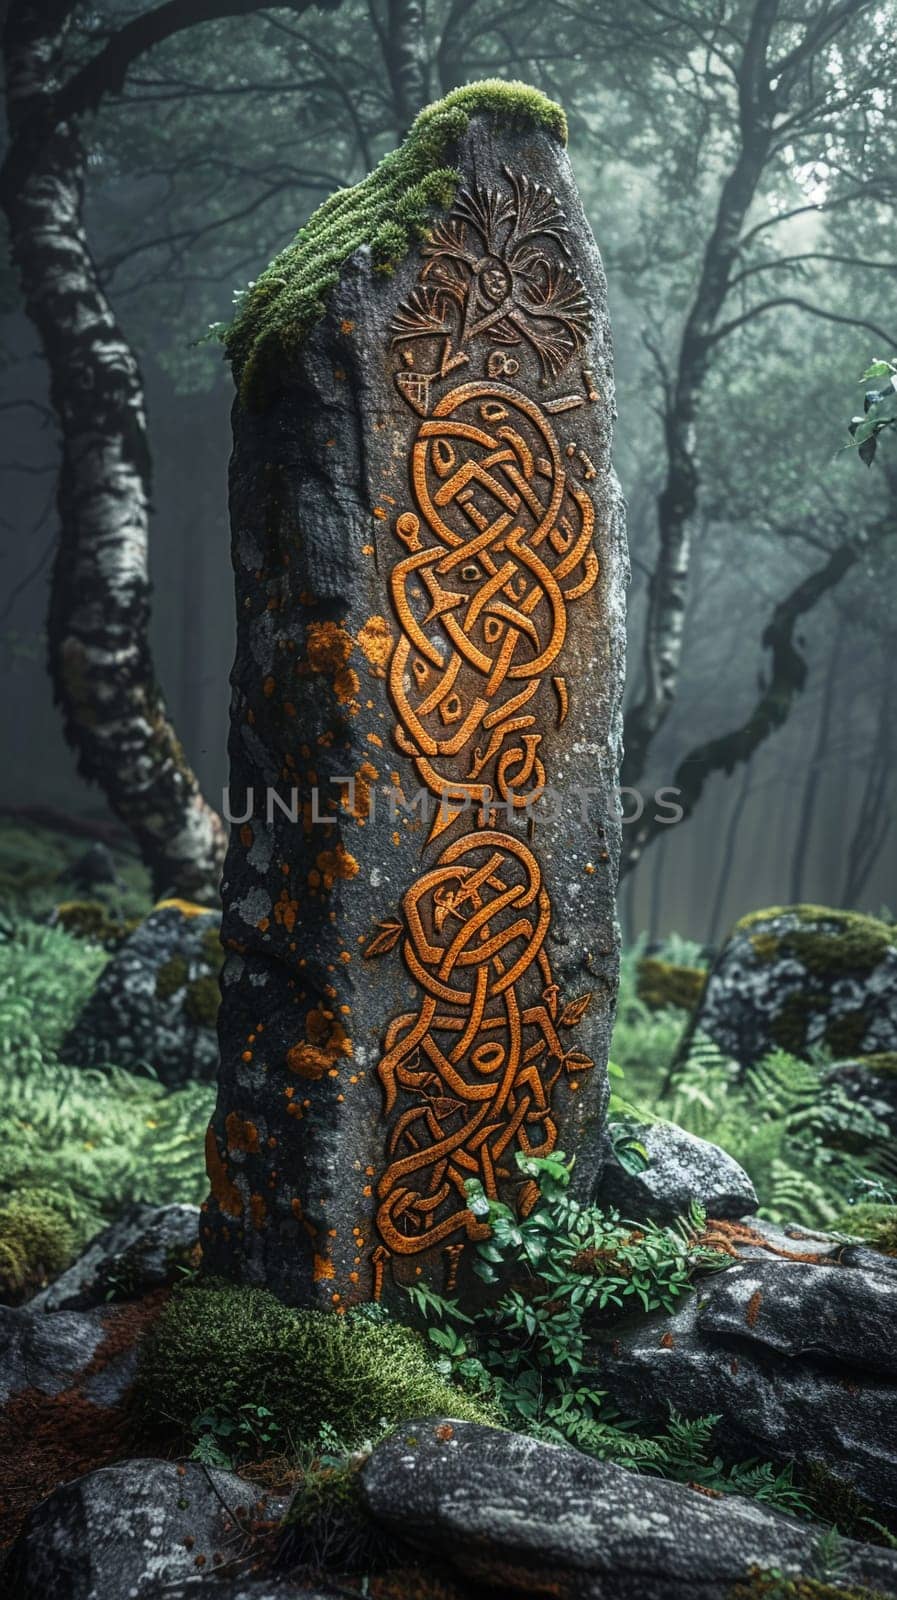 Viking Runestones Whispering Ancient Nordic Lore The runes blur into rock by Benzoix